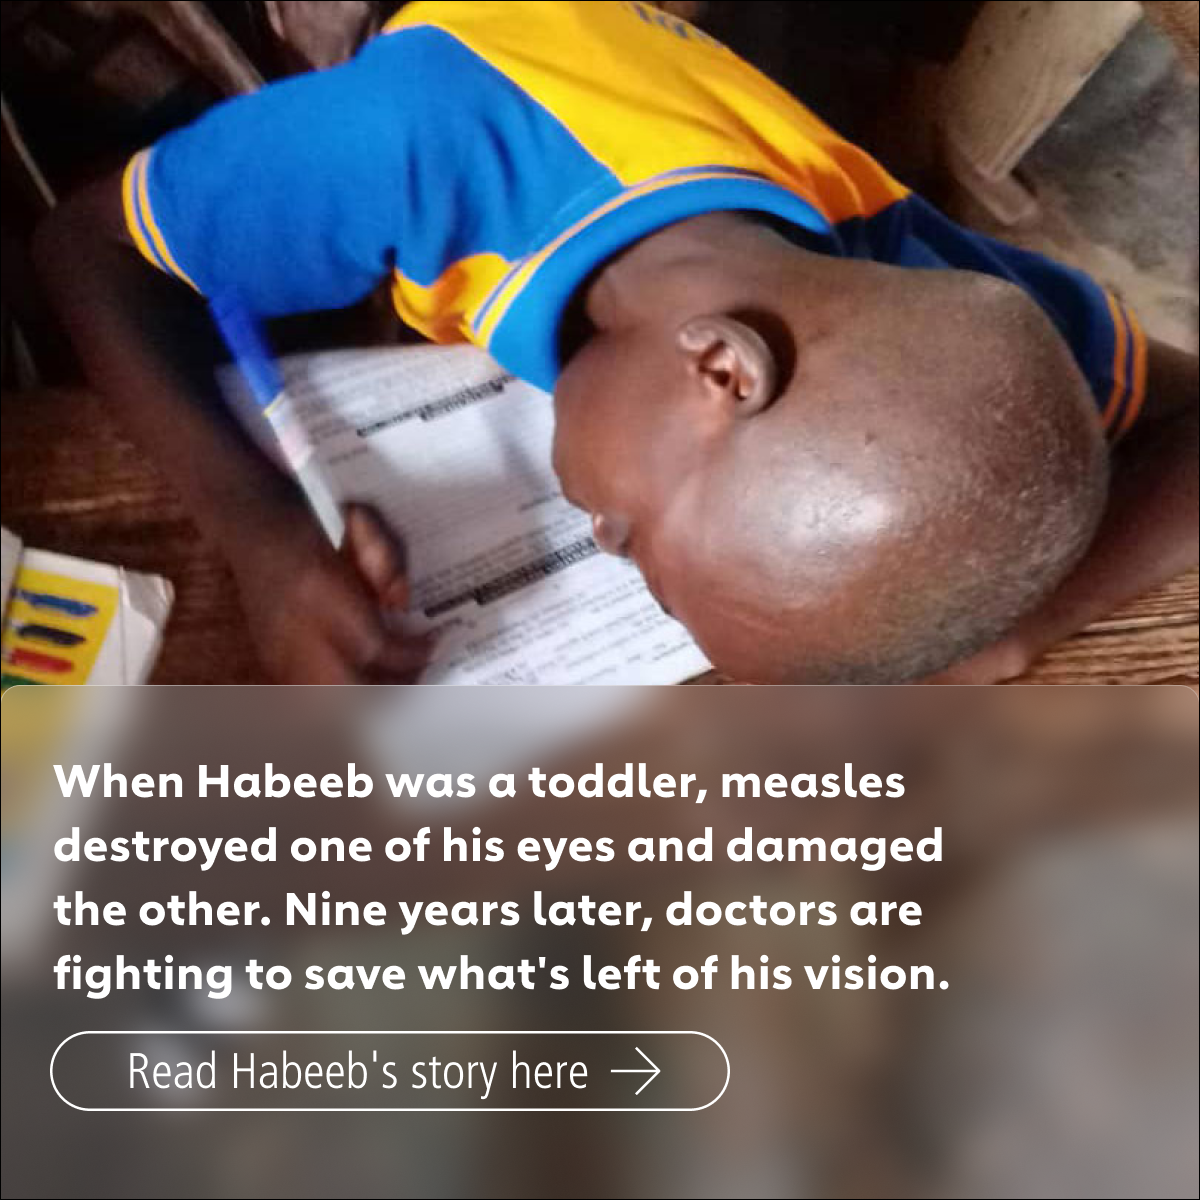 Measles blindness: Habeeb’s story